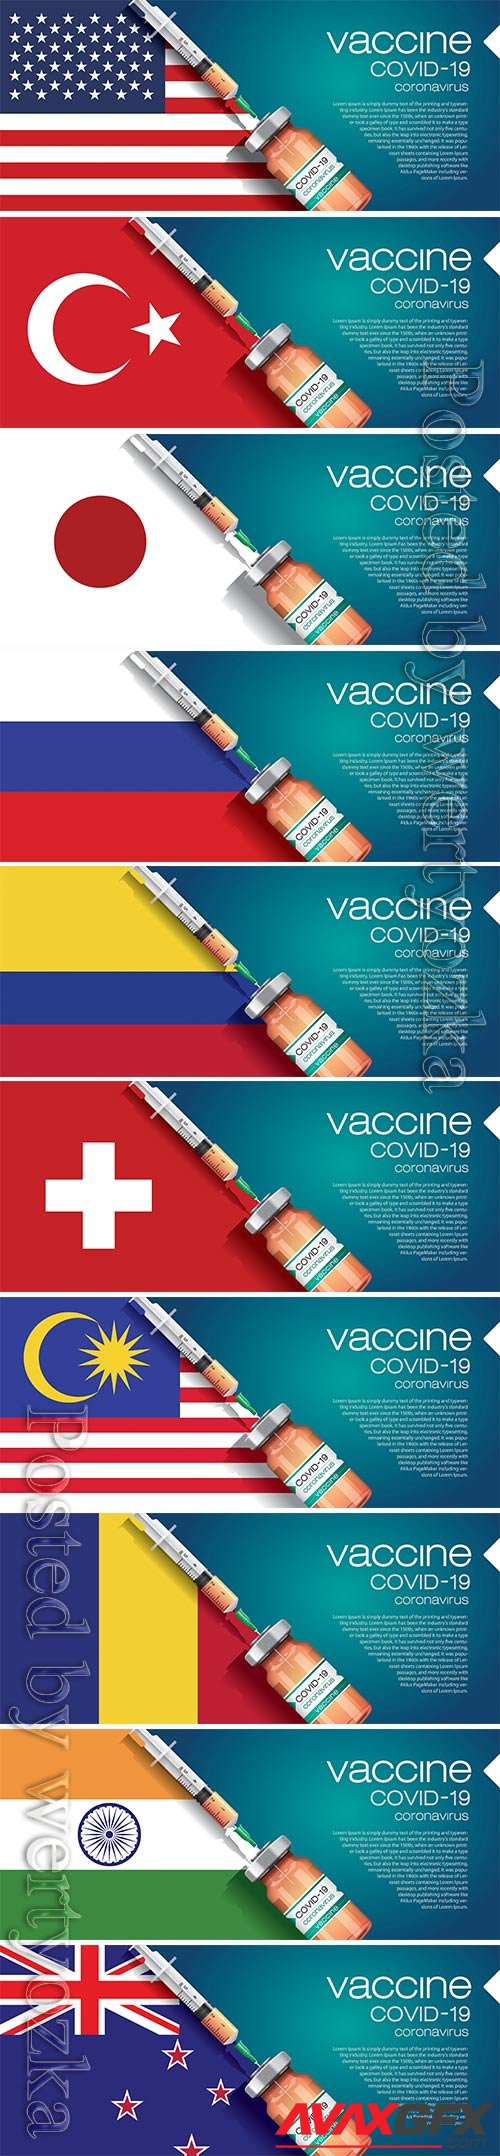 3D corona vaccine illustration and country flag concept